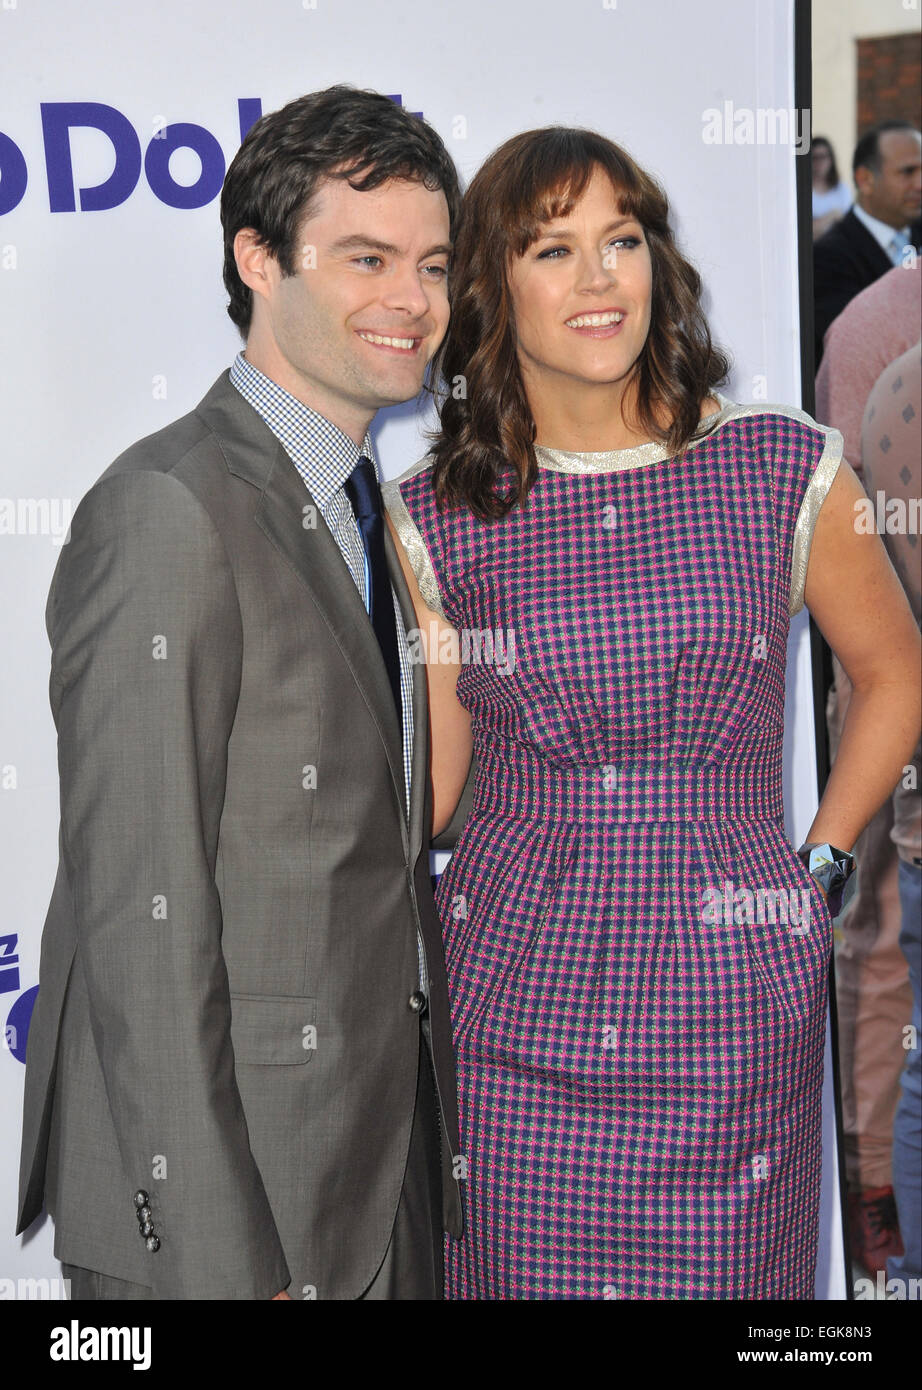 LOS ANGELES, CA - JULY 23, 2013: Actor Bill Hader & wife writer/director Maggie Carey at the Los Angeles premiere of their movie 'The To Do List' at the Regency Bruin Theatre, Westwood. Stock Photo